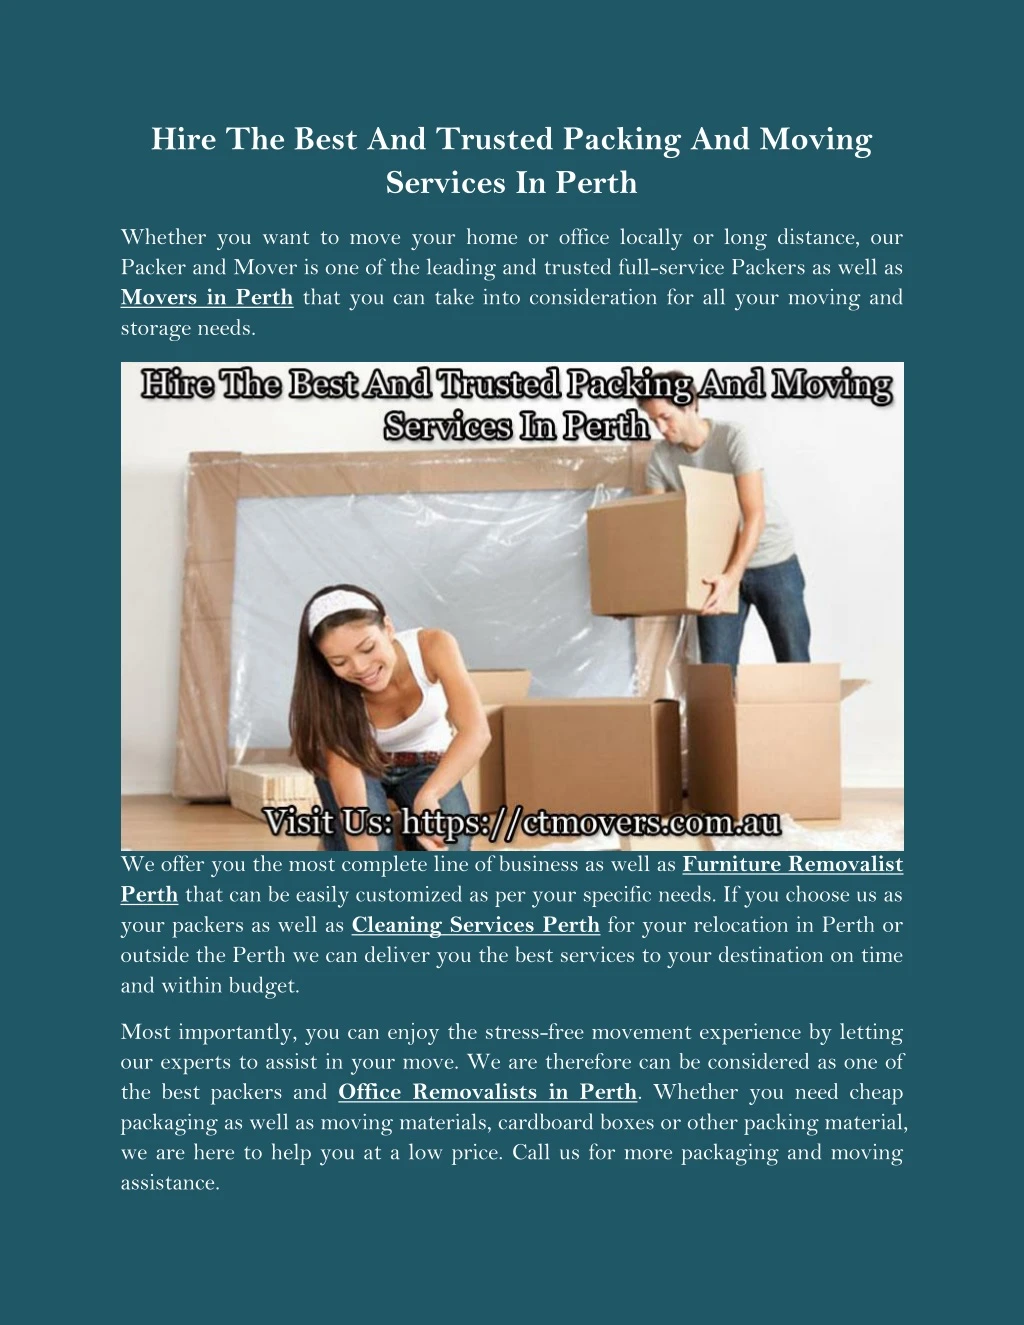 hire the best and trusted packing and moving